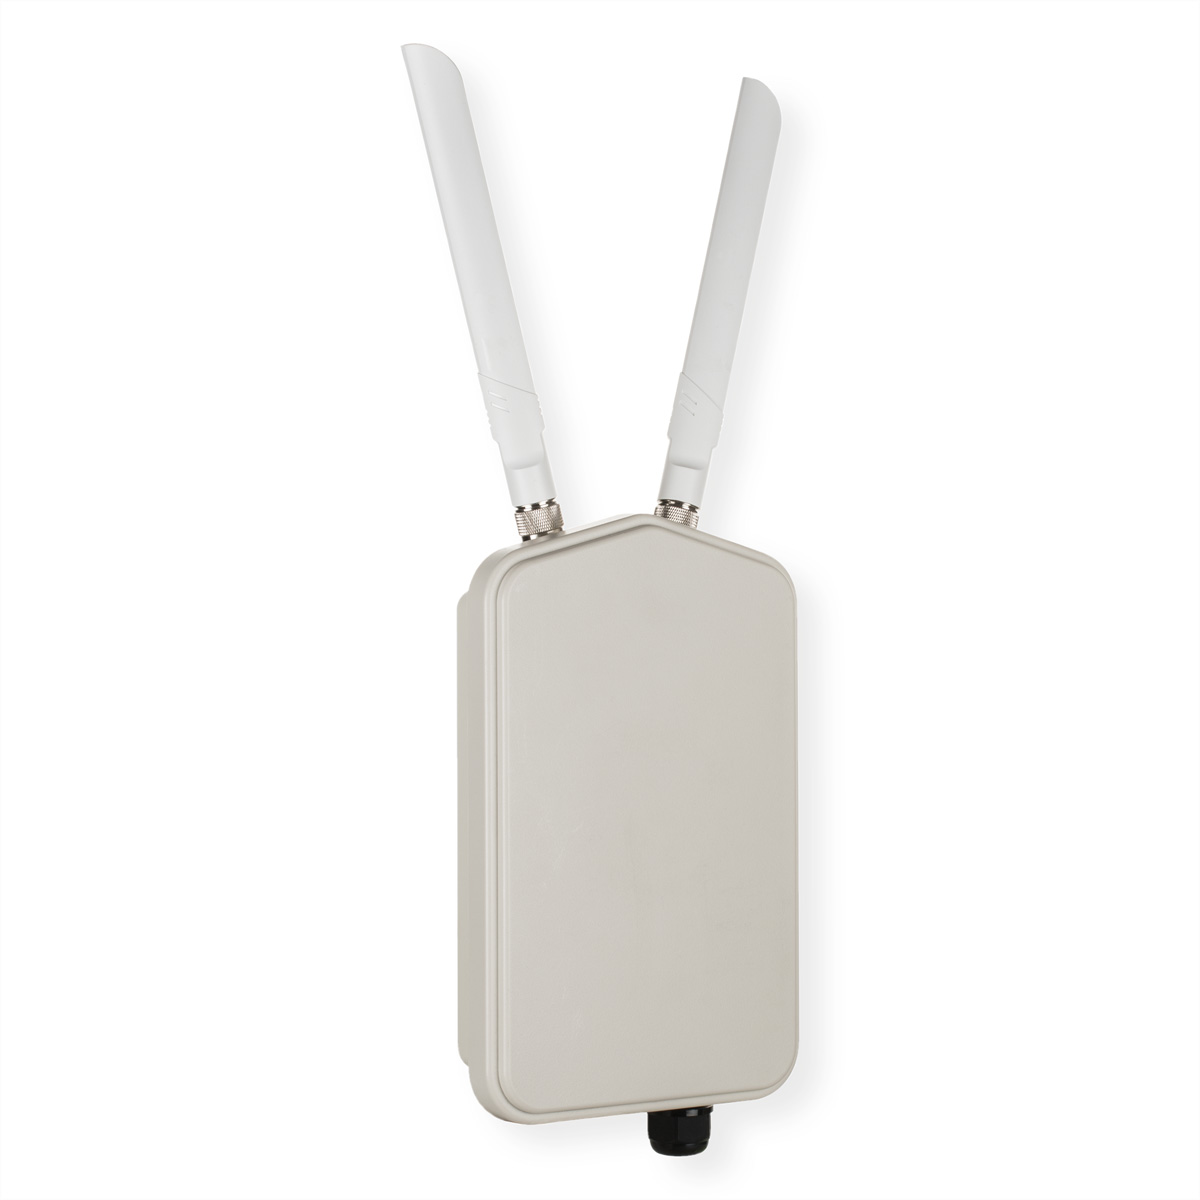 Dual Unified Access Point Access DWL-8720AP Outdoor D-LINK Gbit/s 1,3 AC1300 2 Band Wave Point